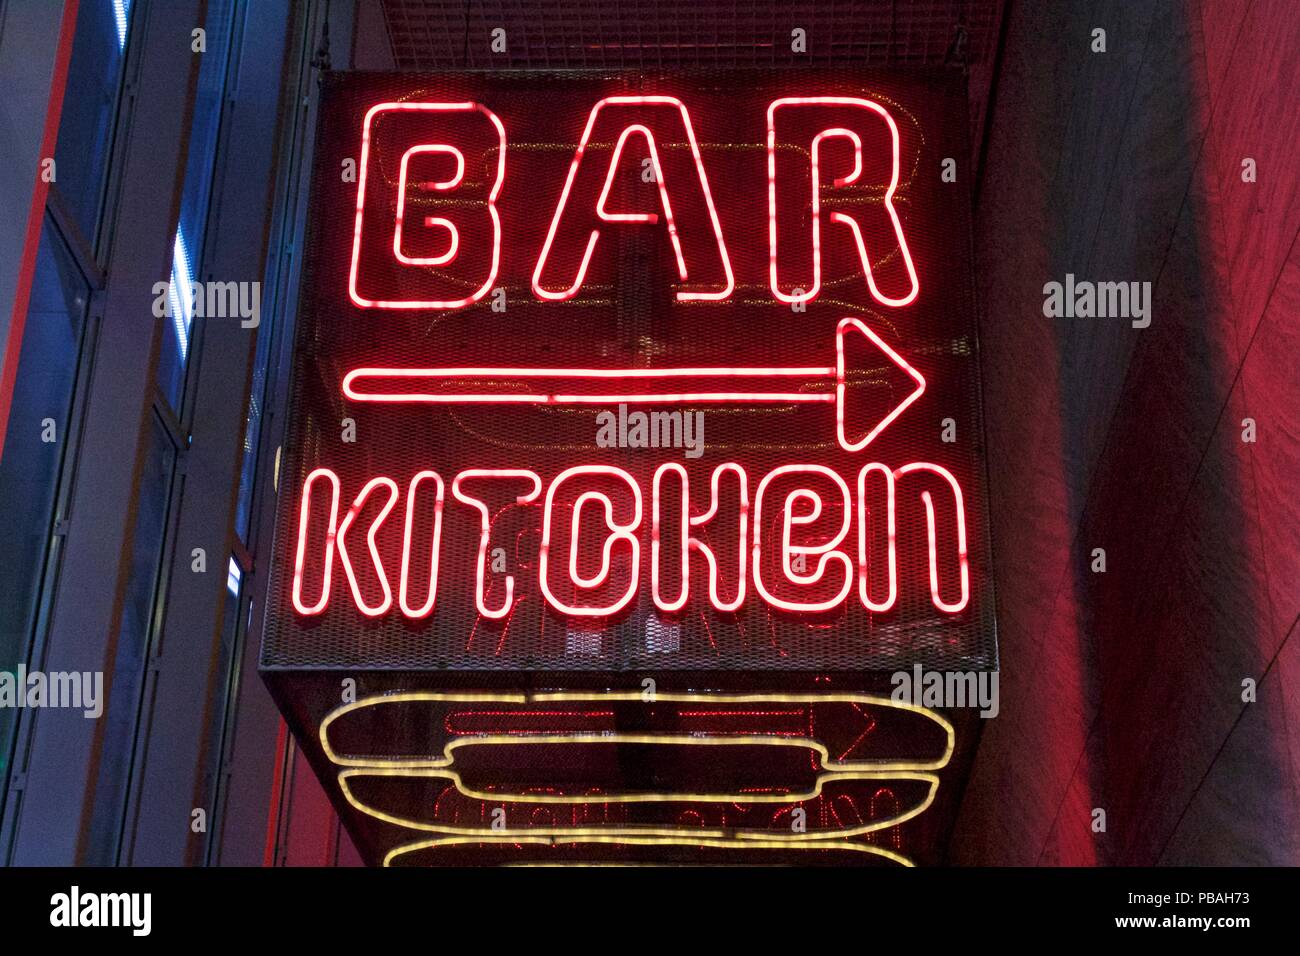 Red neon sign saying Bar Kitchen with an arrow pointing to the right Stock Photo